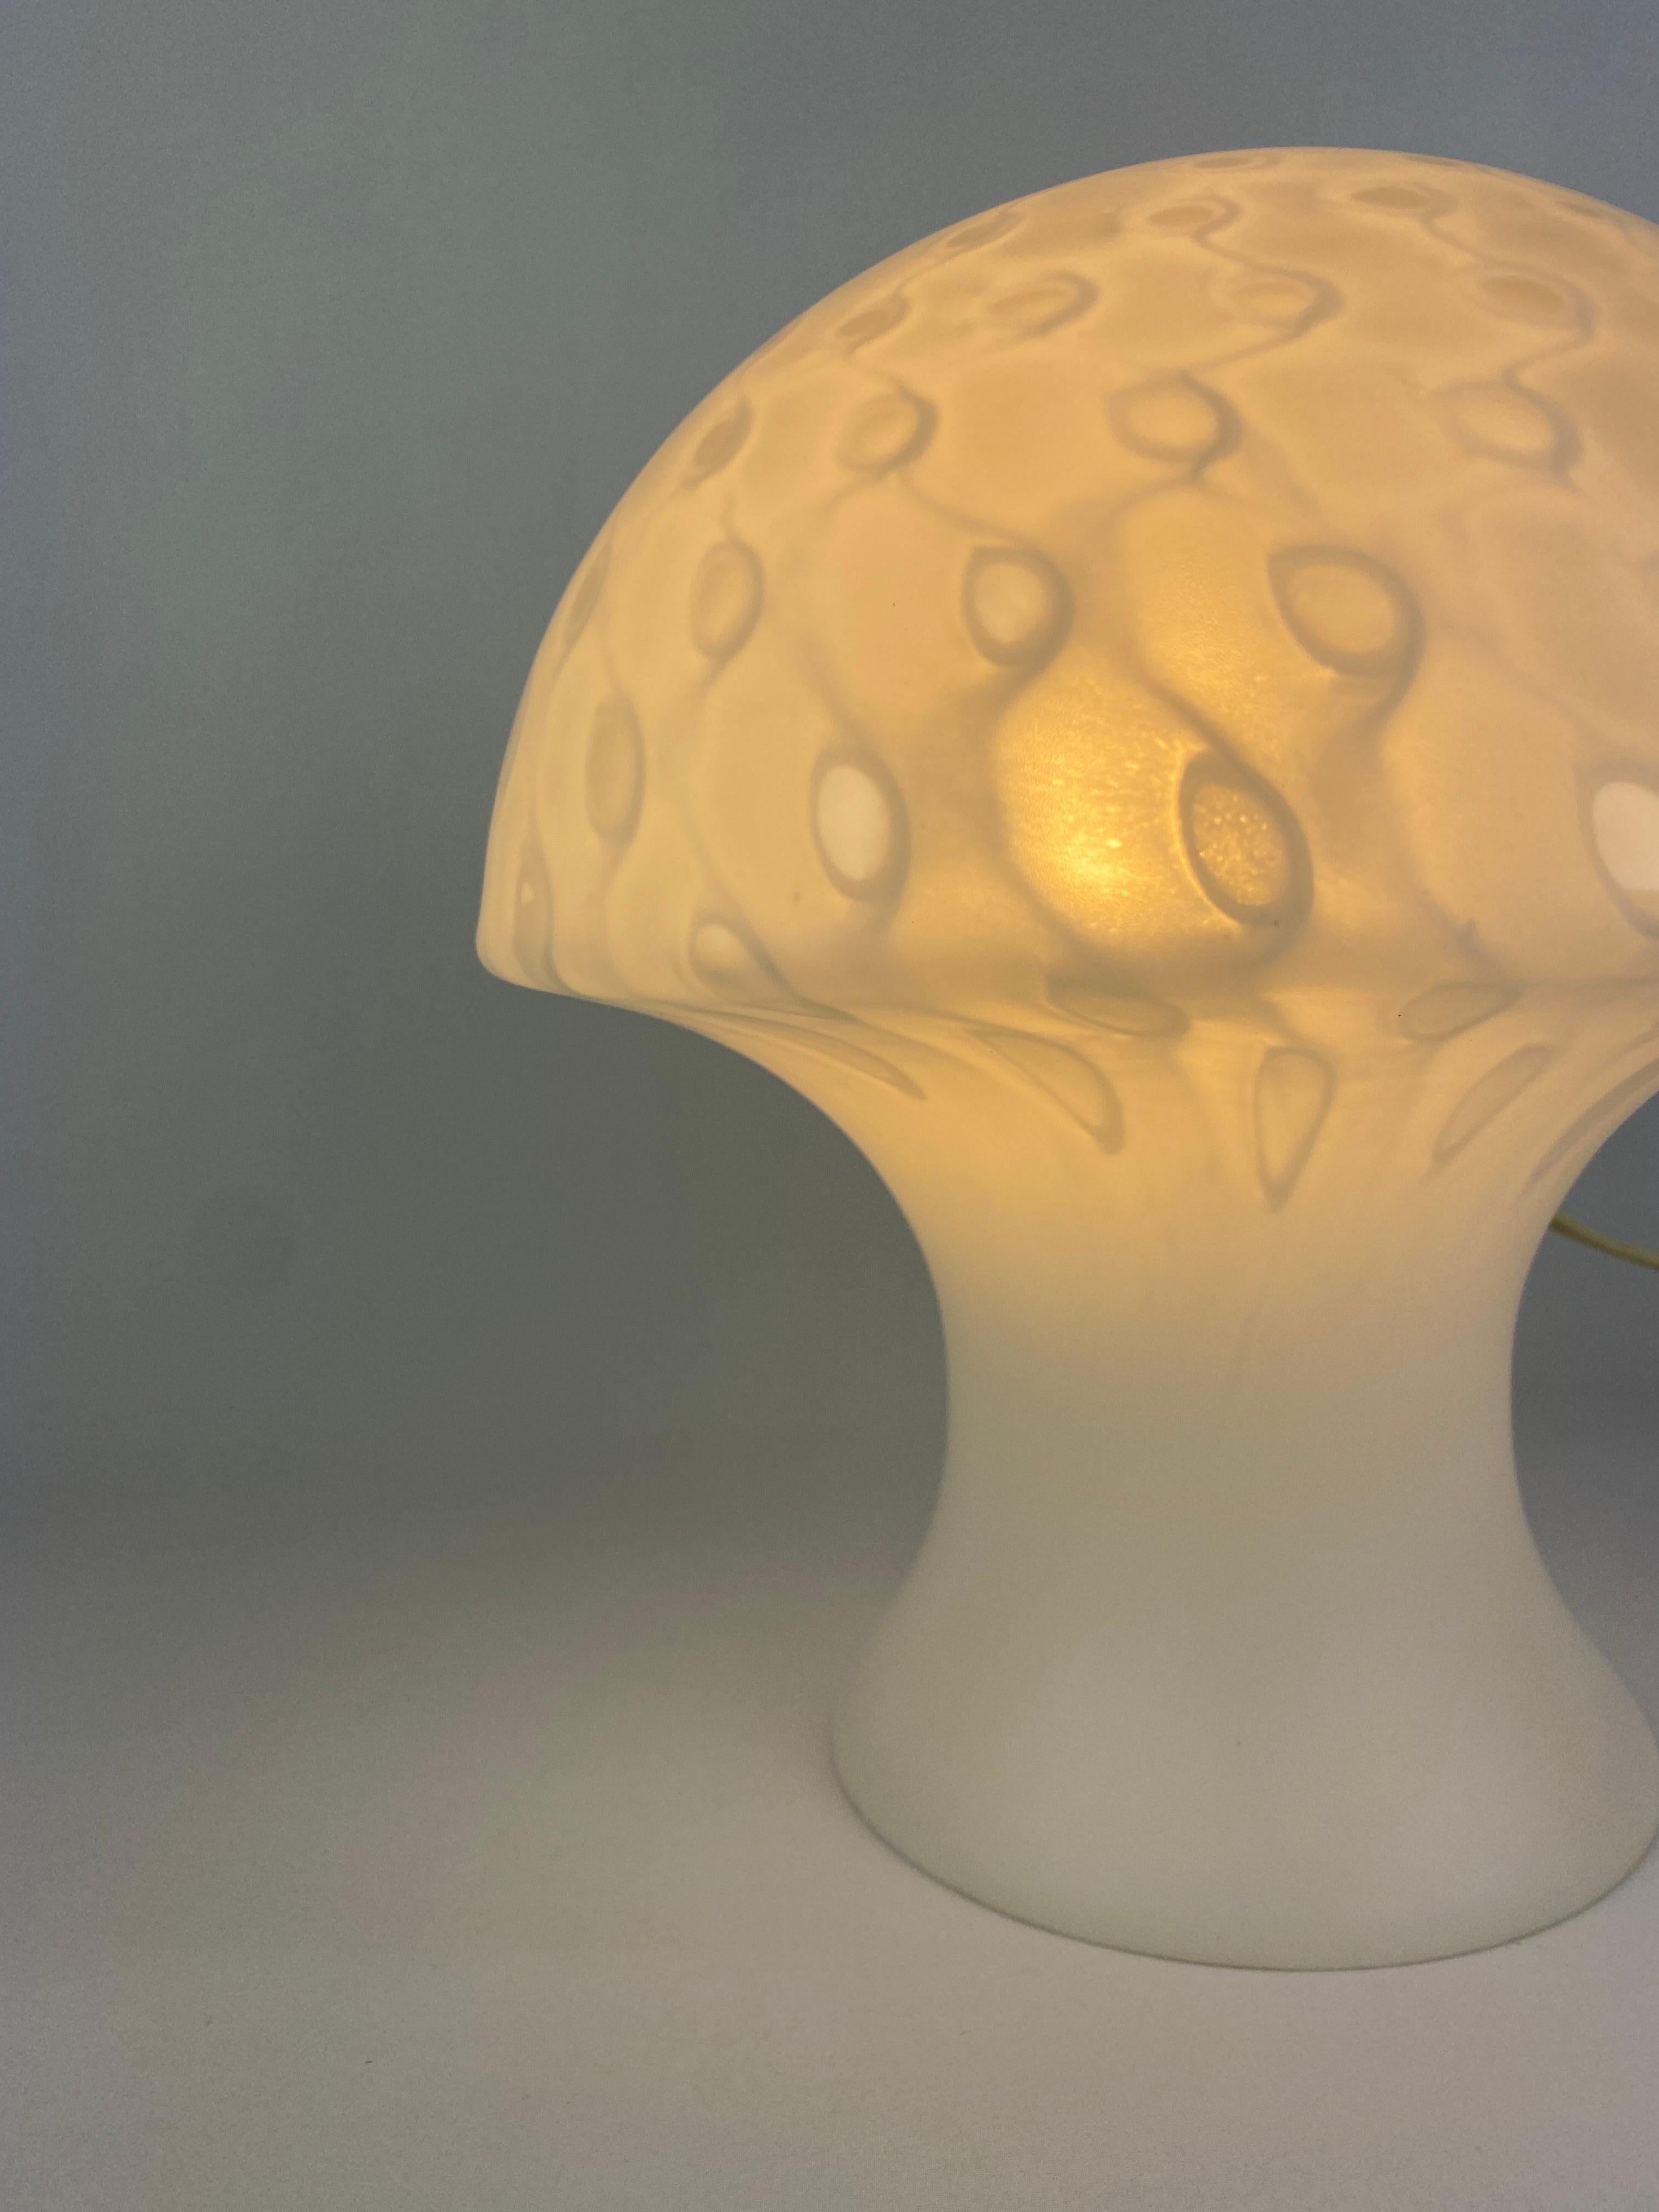 Very cool glass mushroom lamp by Peill and Putzler, produced around 1970 - 1980. This model is not very common.

This lamp is made of one mouth-blown piece of crystal glass with a interesting print and it's shaped like a typical mid-century